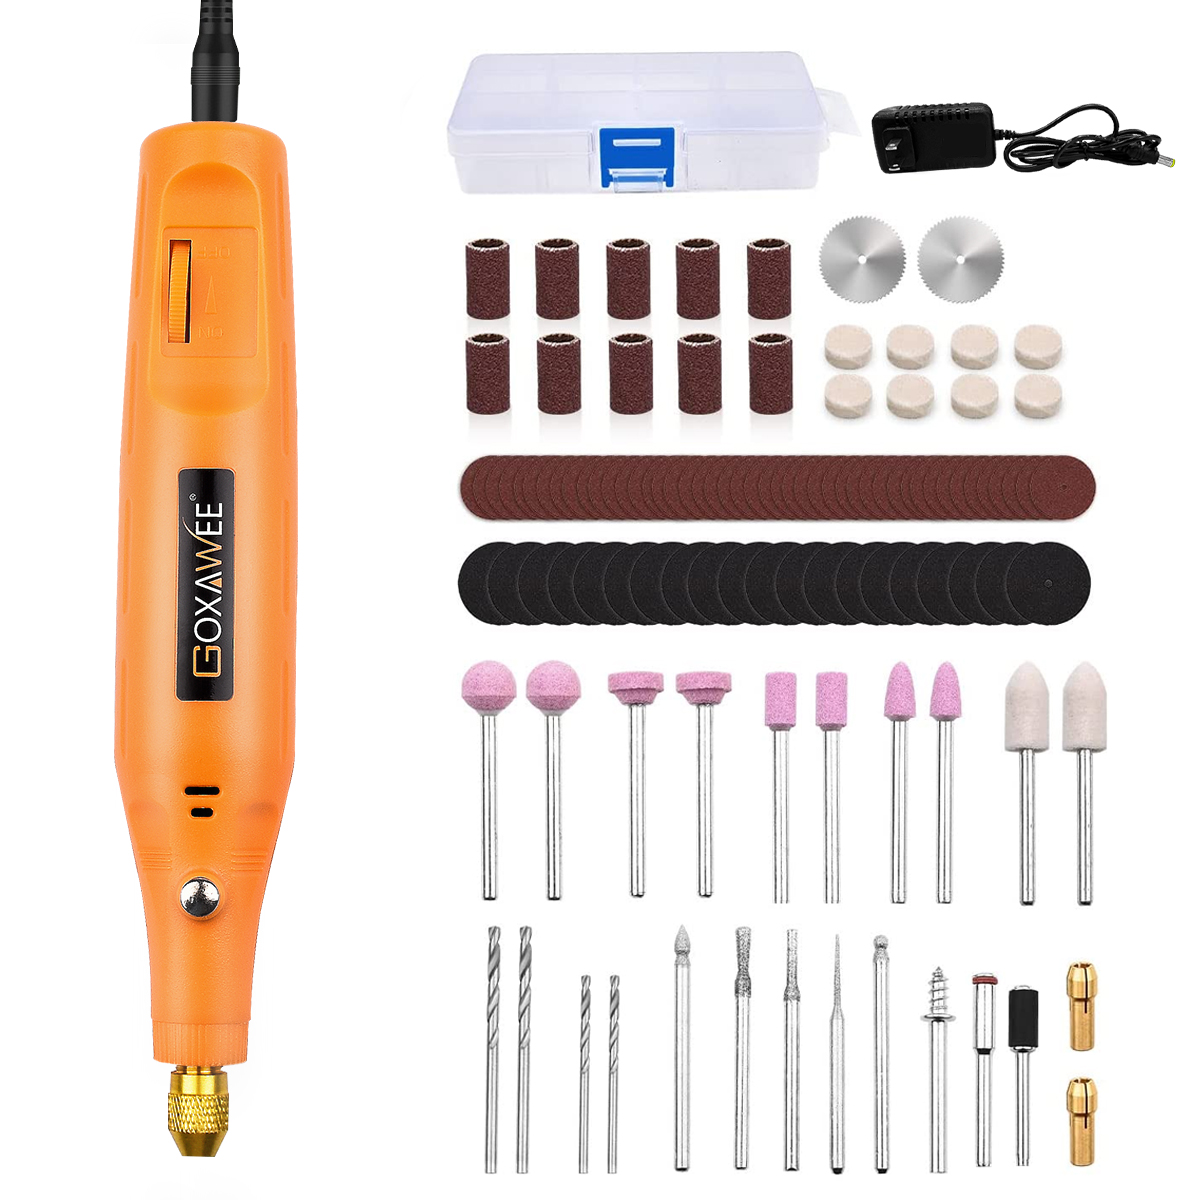 GOXAWEE 24V Mini Rotary Tool, Corded Rotary Tool with 105pcs Accessories, 18000rpm Multi-Purpose Power Rotary Tool for Handmade Crafting and DIY Creations.(Vibrant Orange)